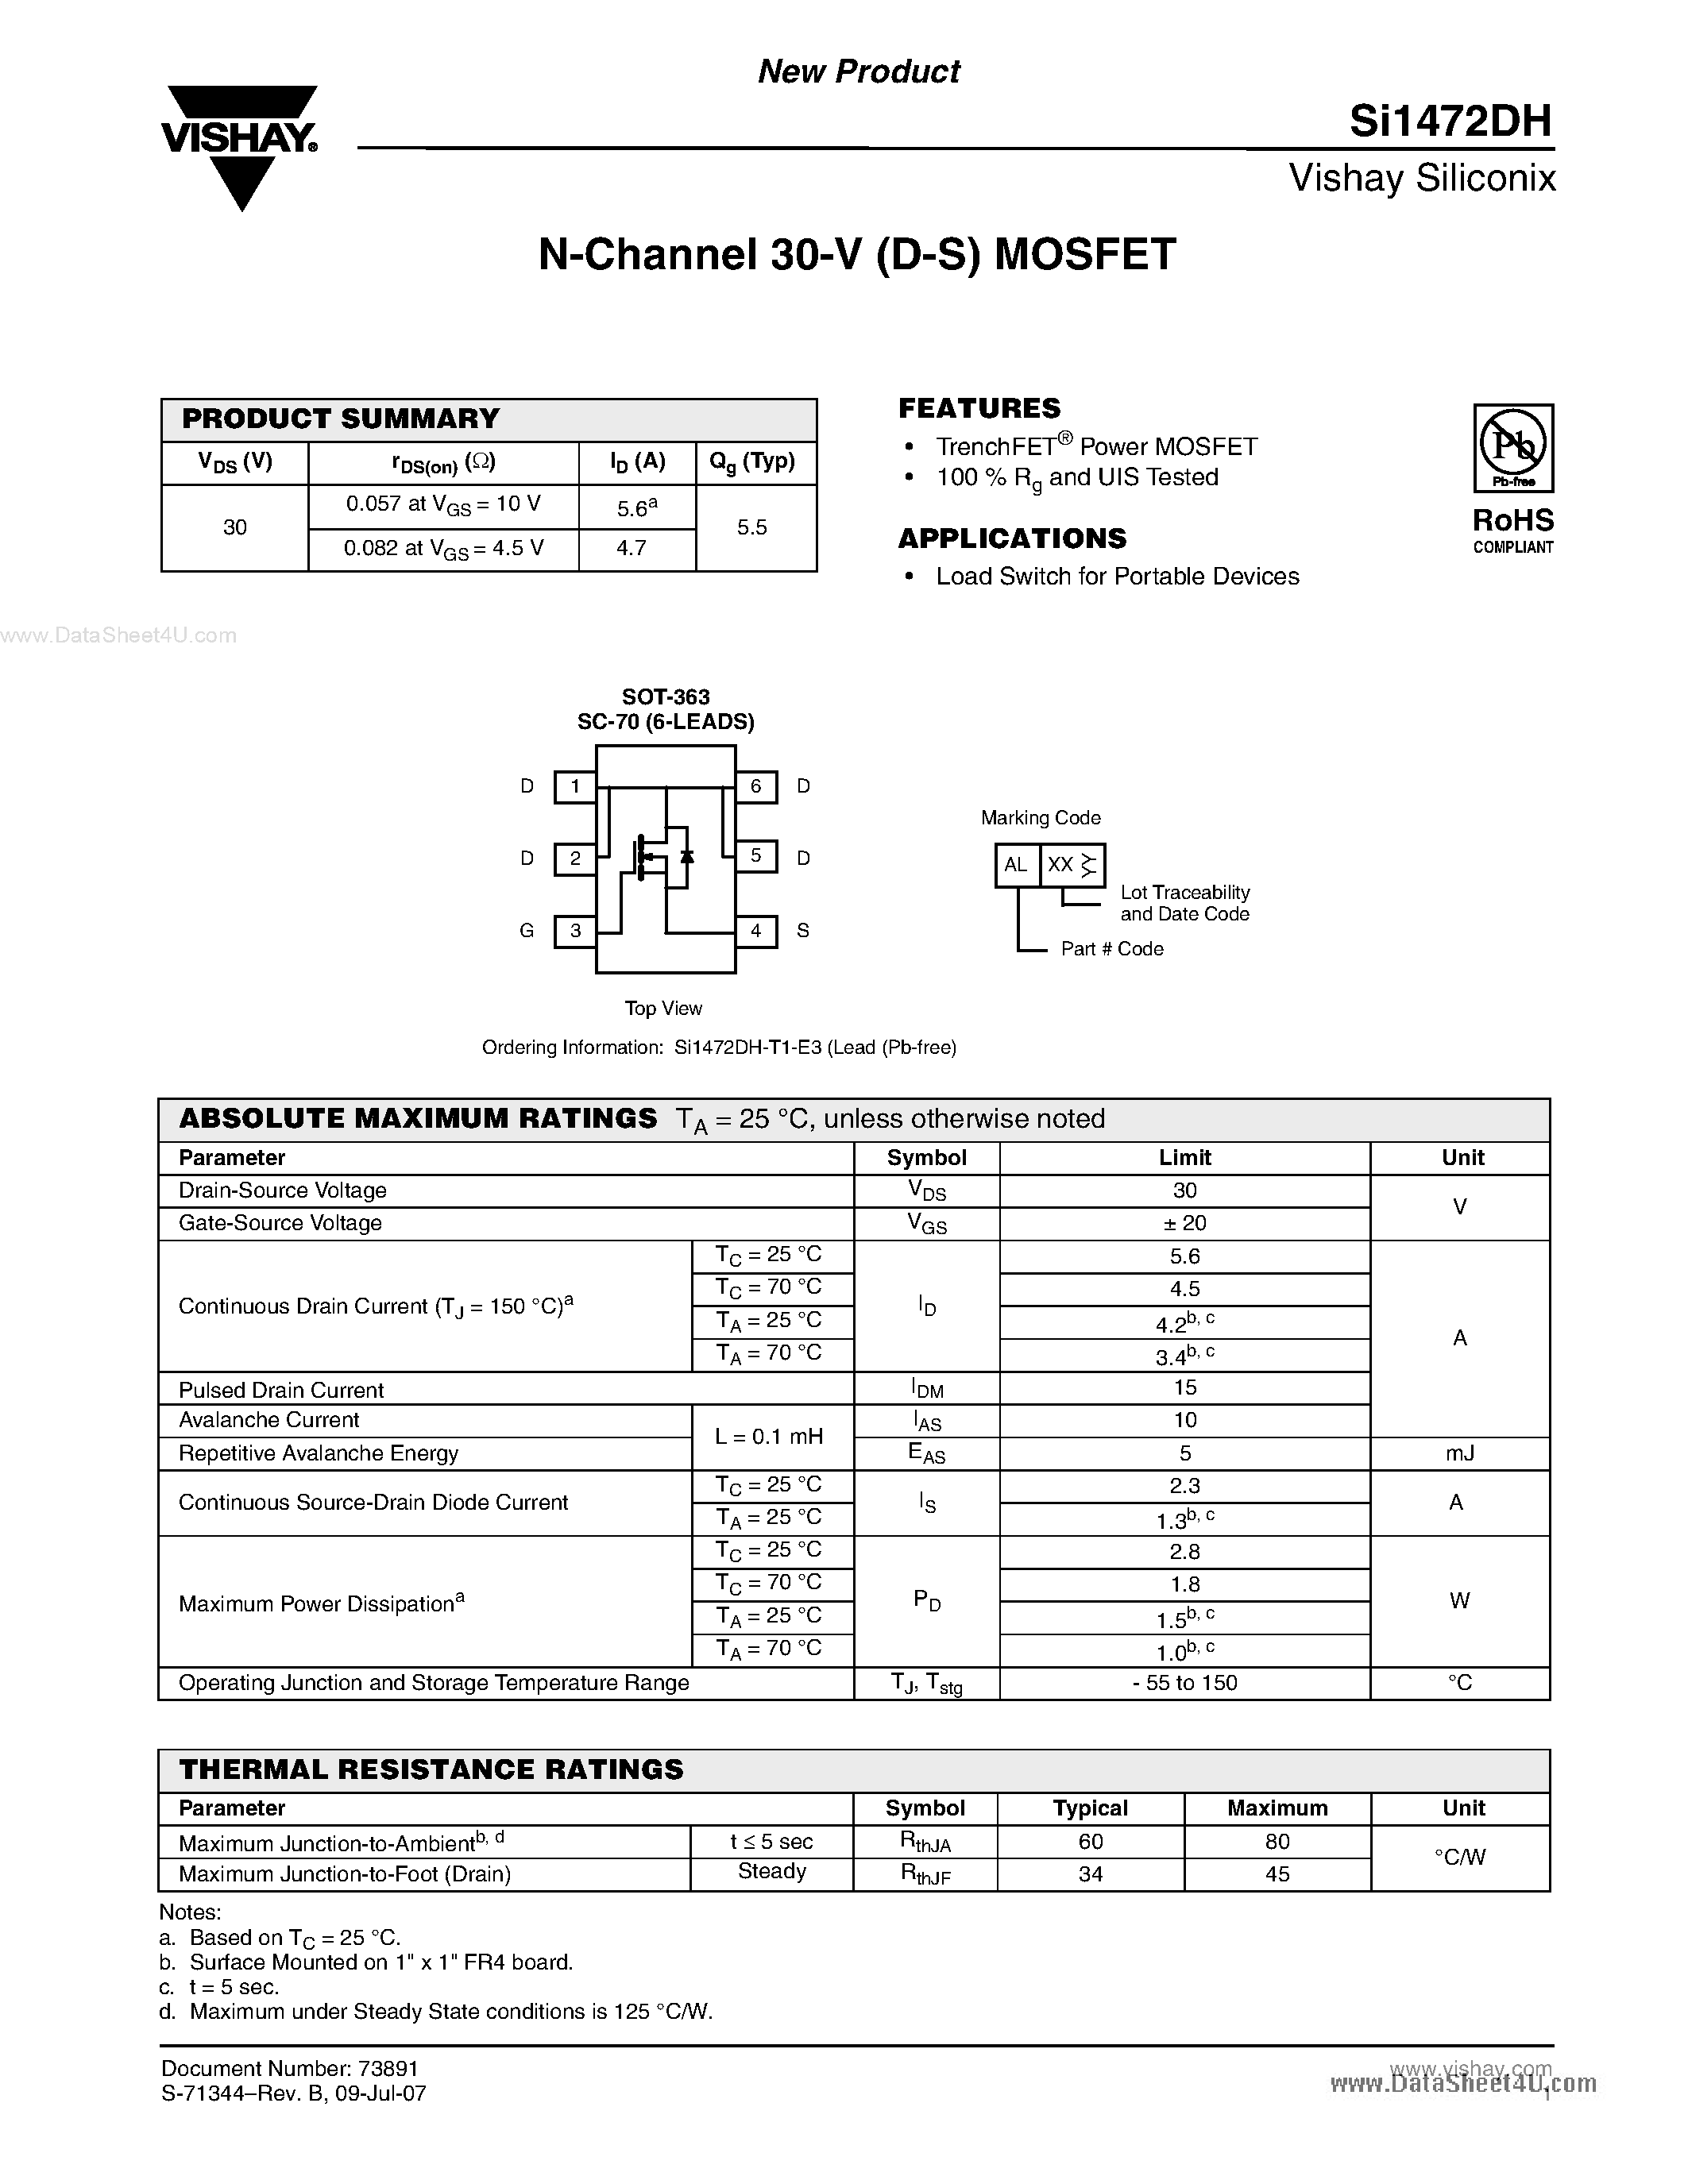 Даташит SI1472DH - N-Channel MOSFET страница 1